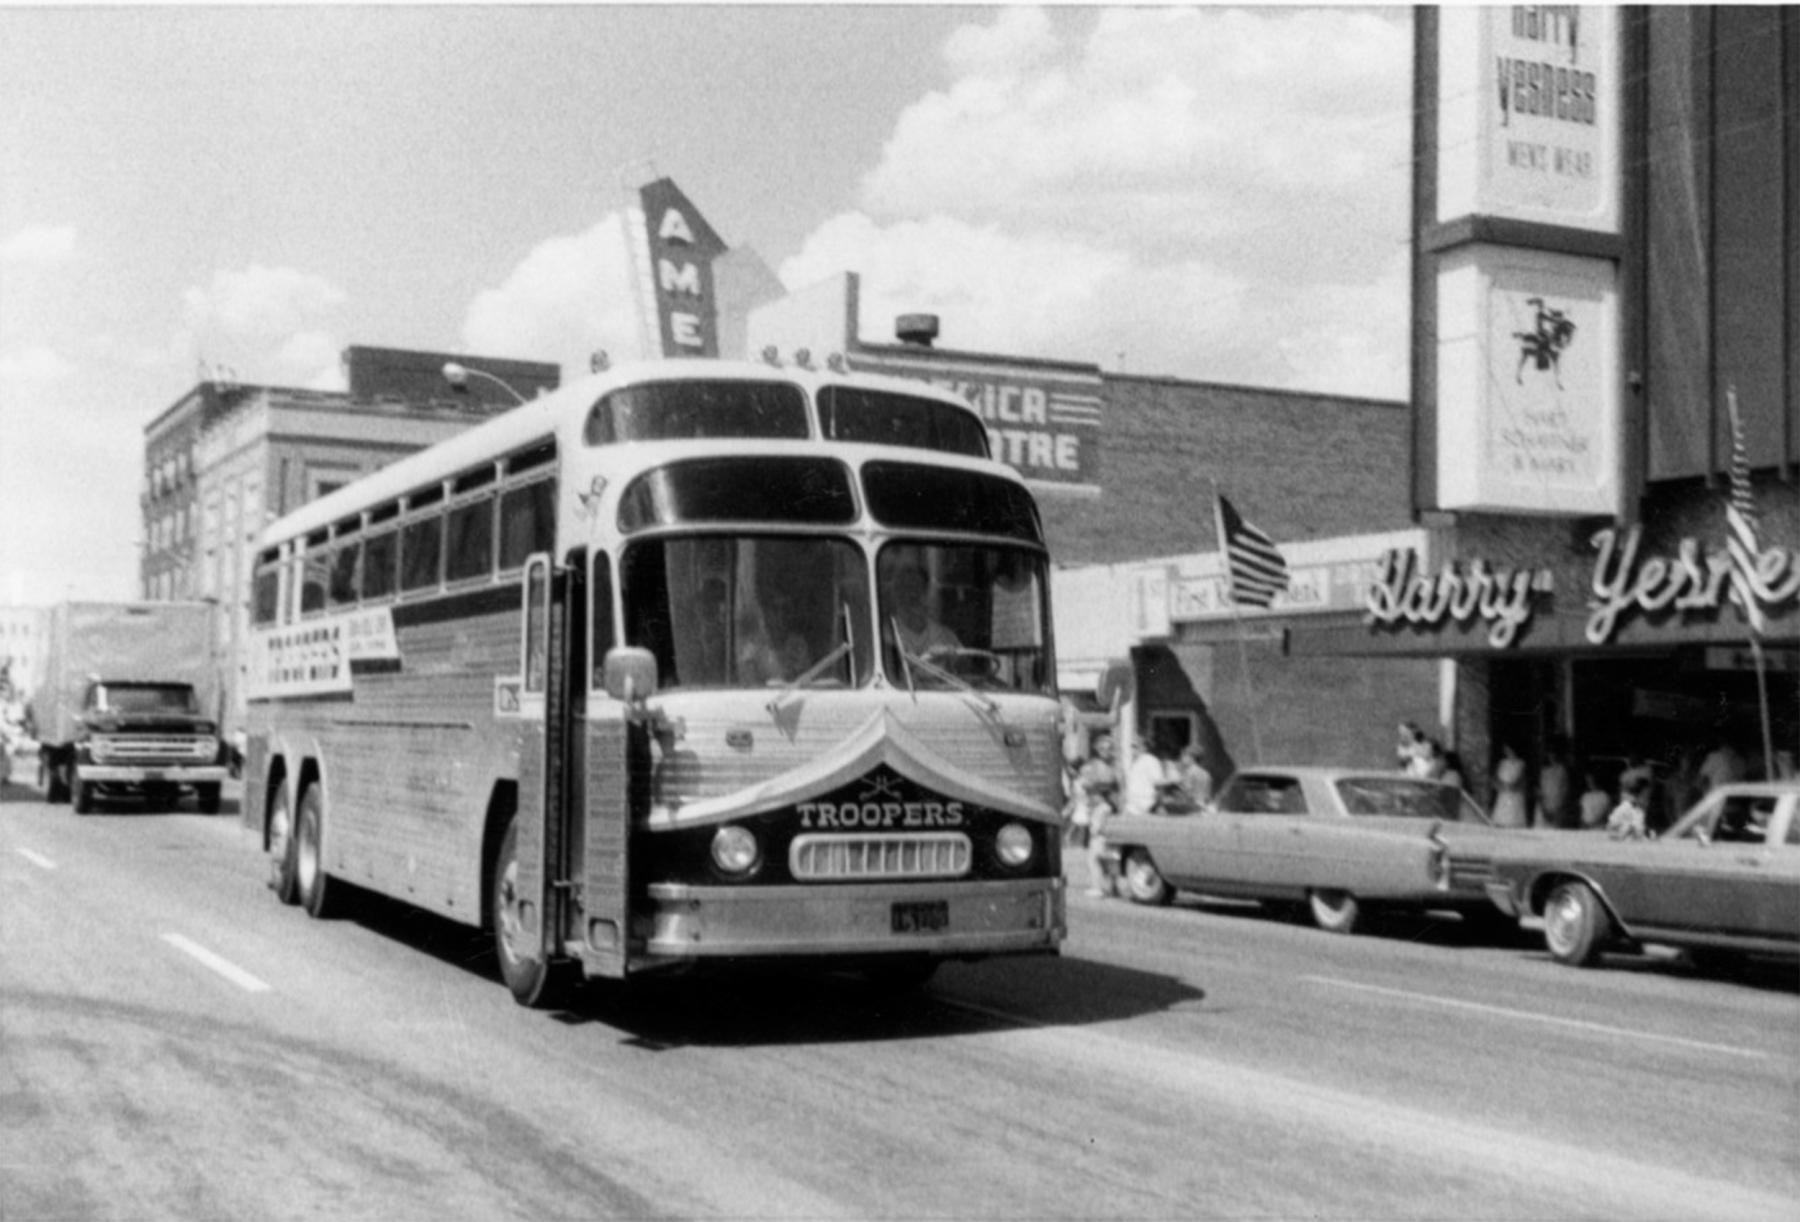 The Troopers pioneered long-distance travel for drum corps. Here, a Troopers bus arrives in Casper driving down Center Street past the America Theatre and Harry Yesness men’s store, 1970. Troopers Archives #1910.